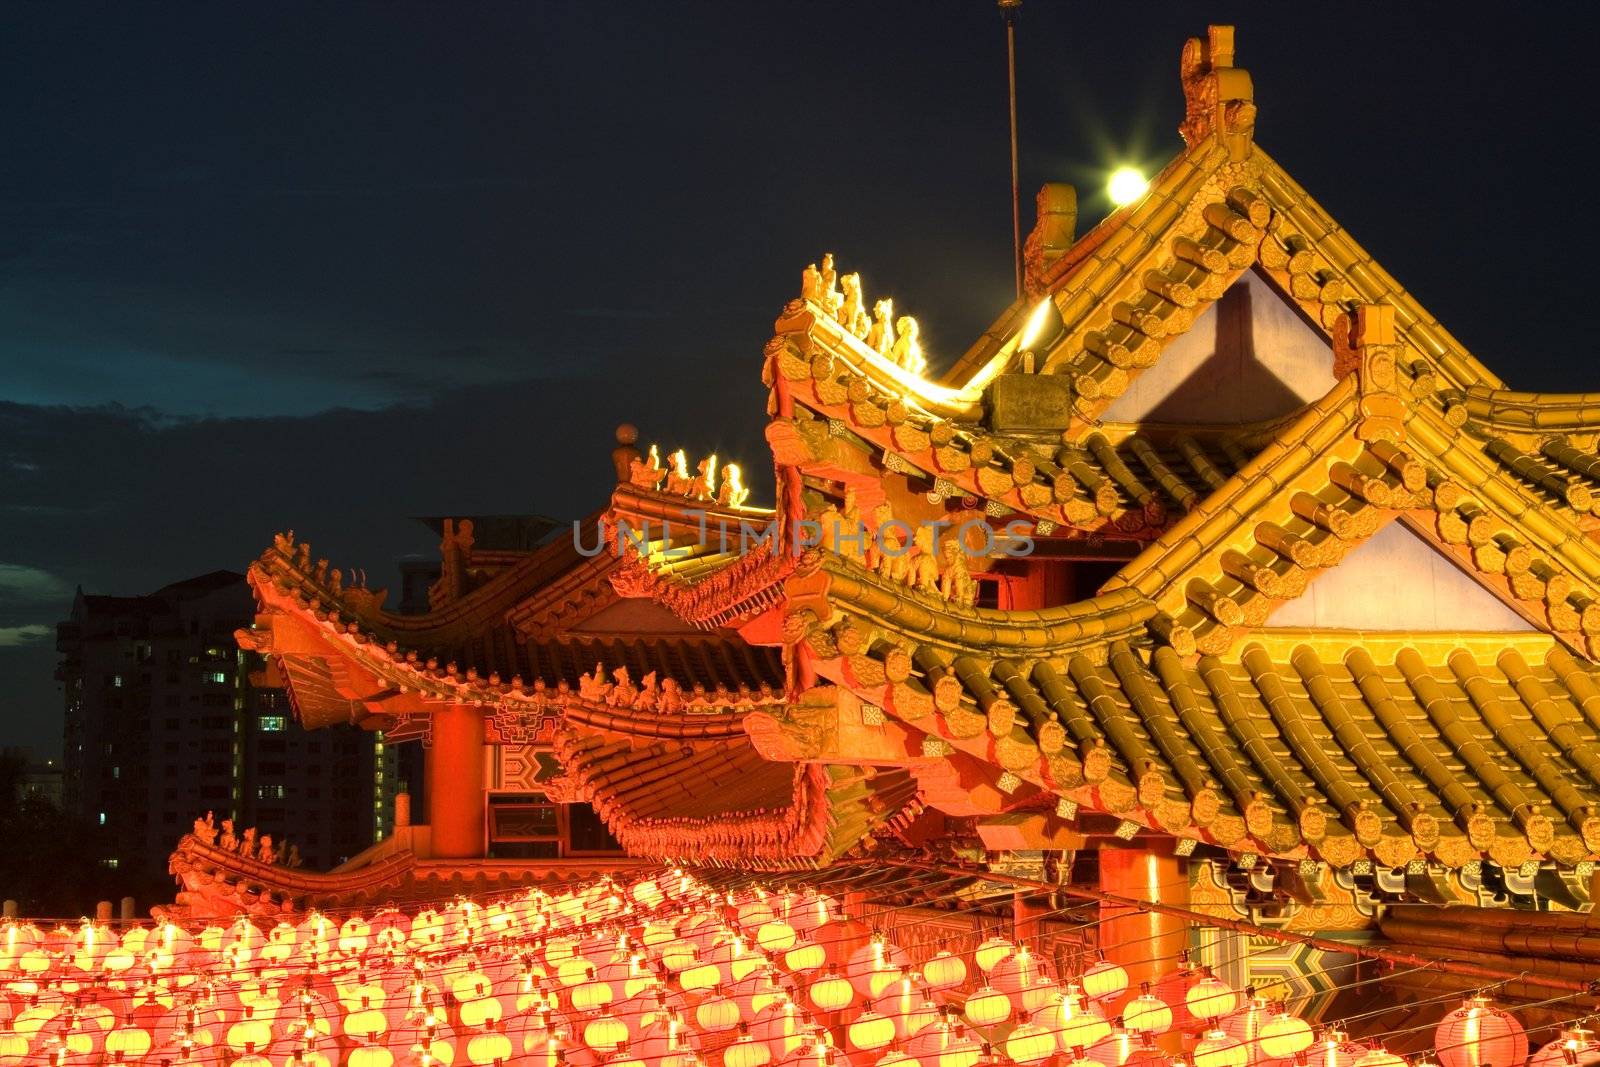 Image of a Chinese temple with lanterns in Malaysia at dusk.